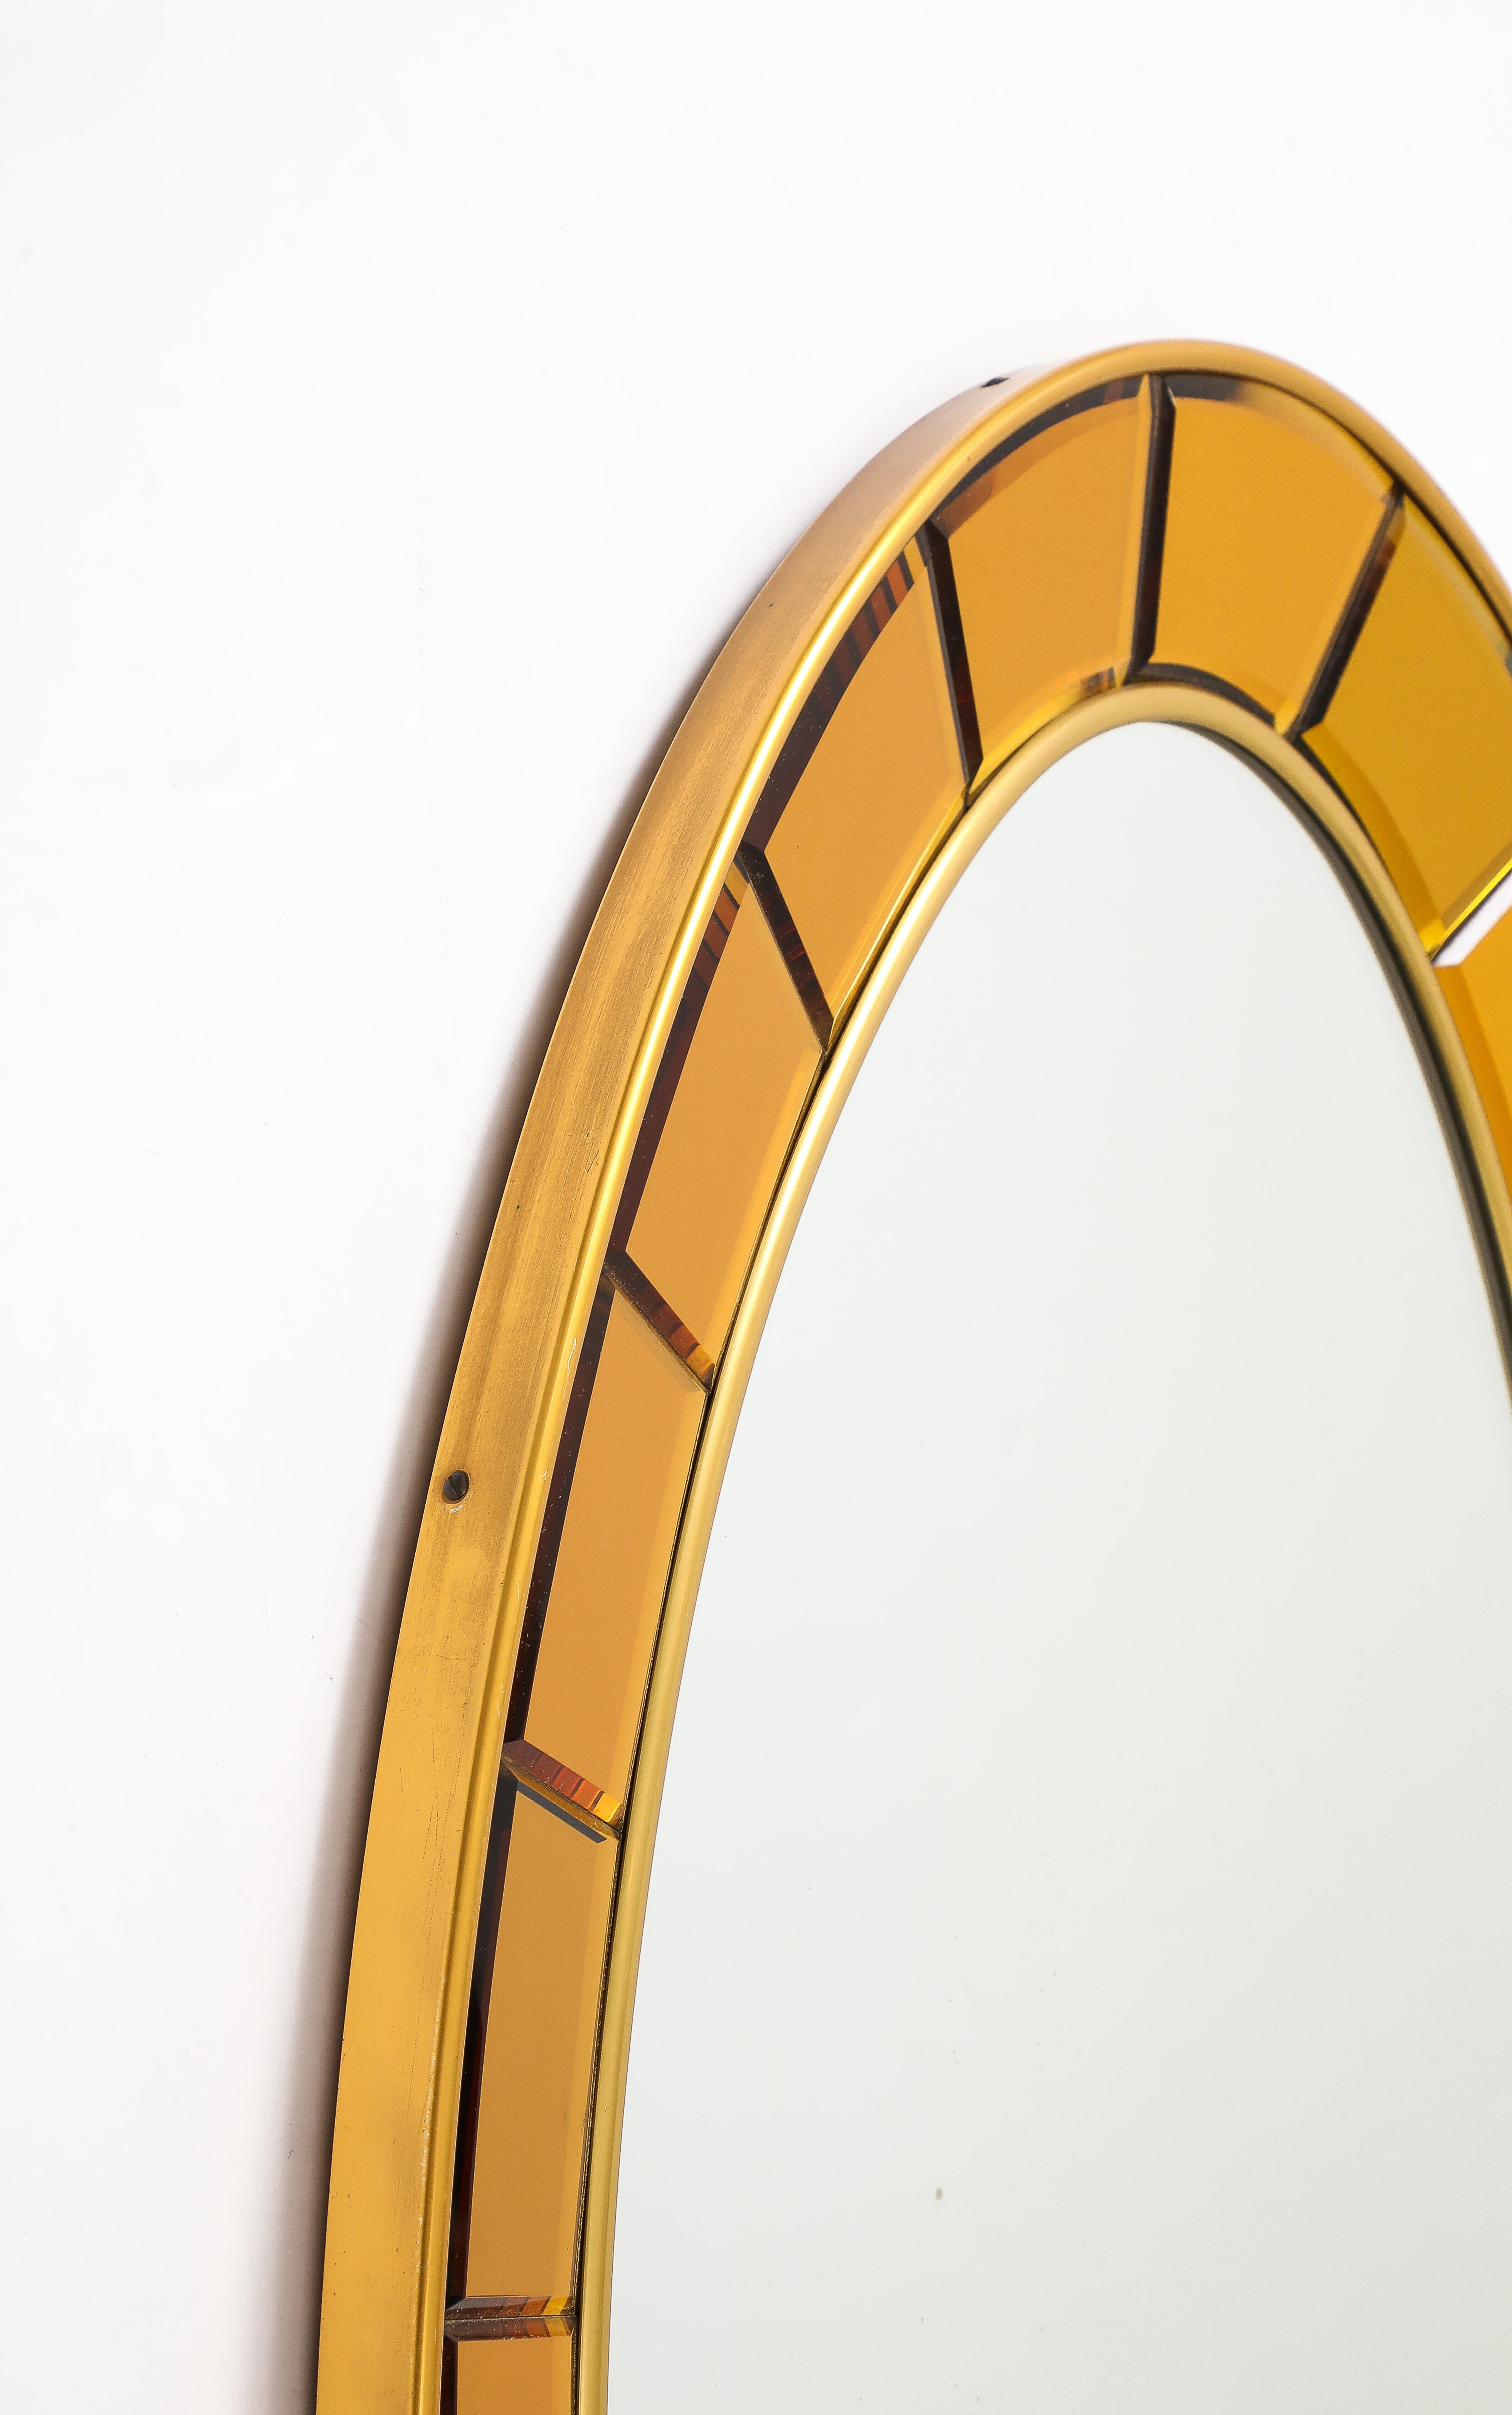 Cristal Art Oval Gold Hand-Cut Beveled Glass Mirror Model 2727, 1950s For Sale 5